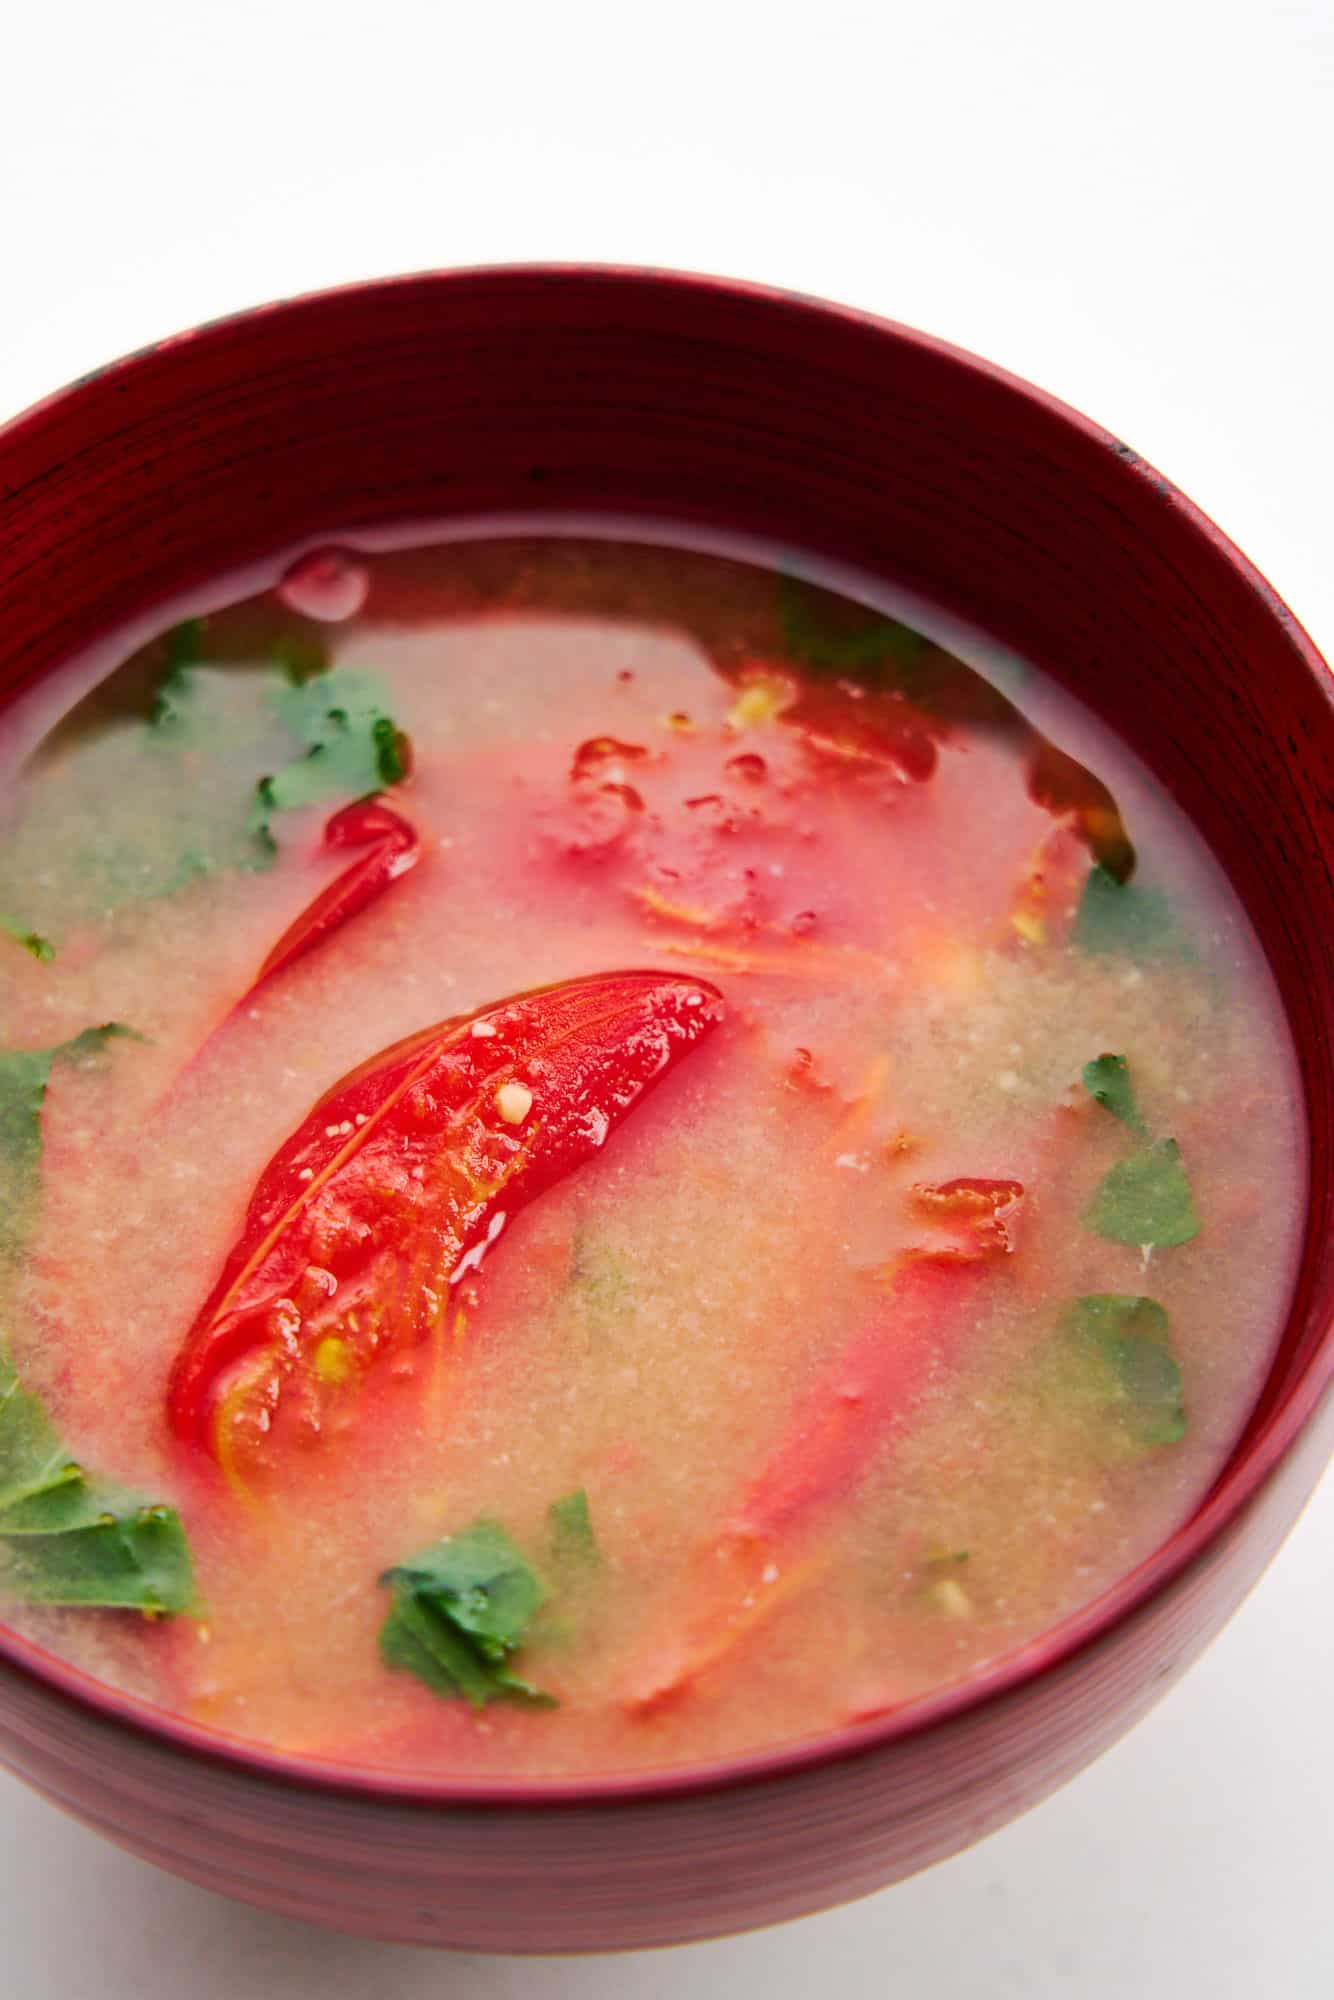 Summer miso soup with sun ripened tomatoes and fresh shiso leaves.